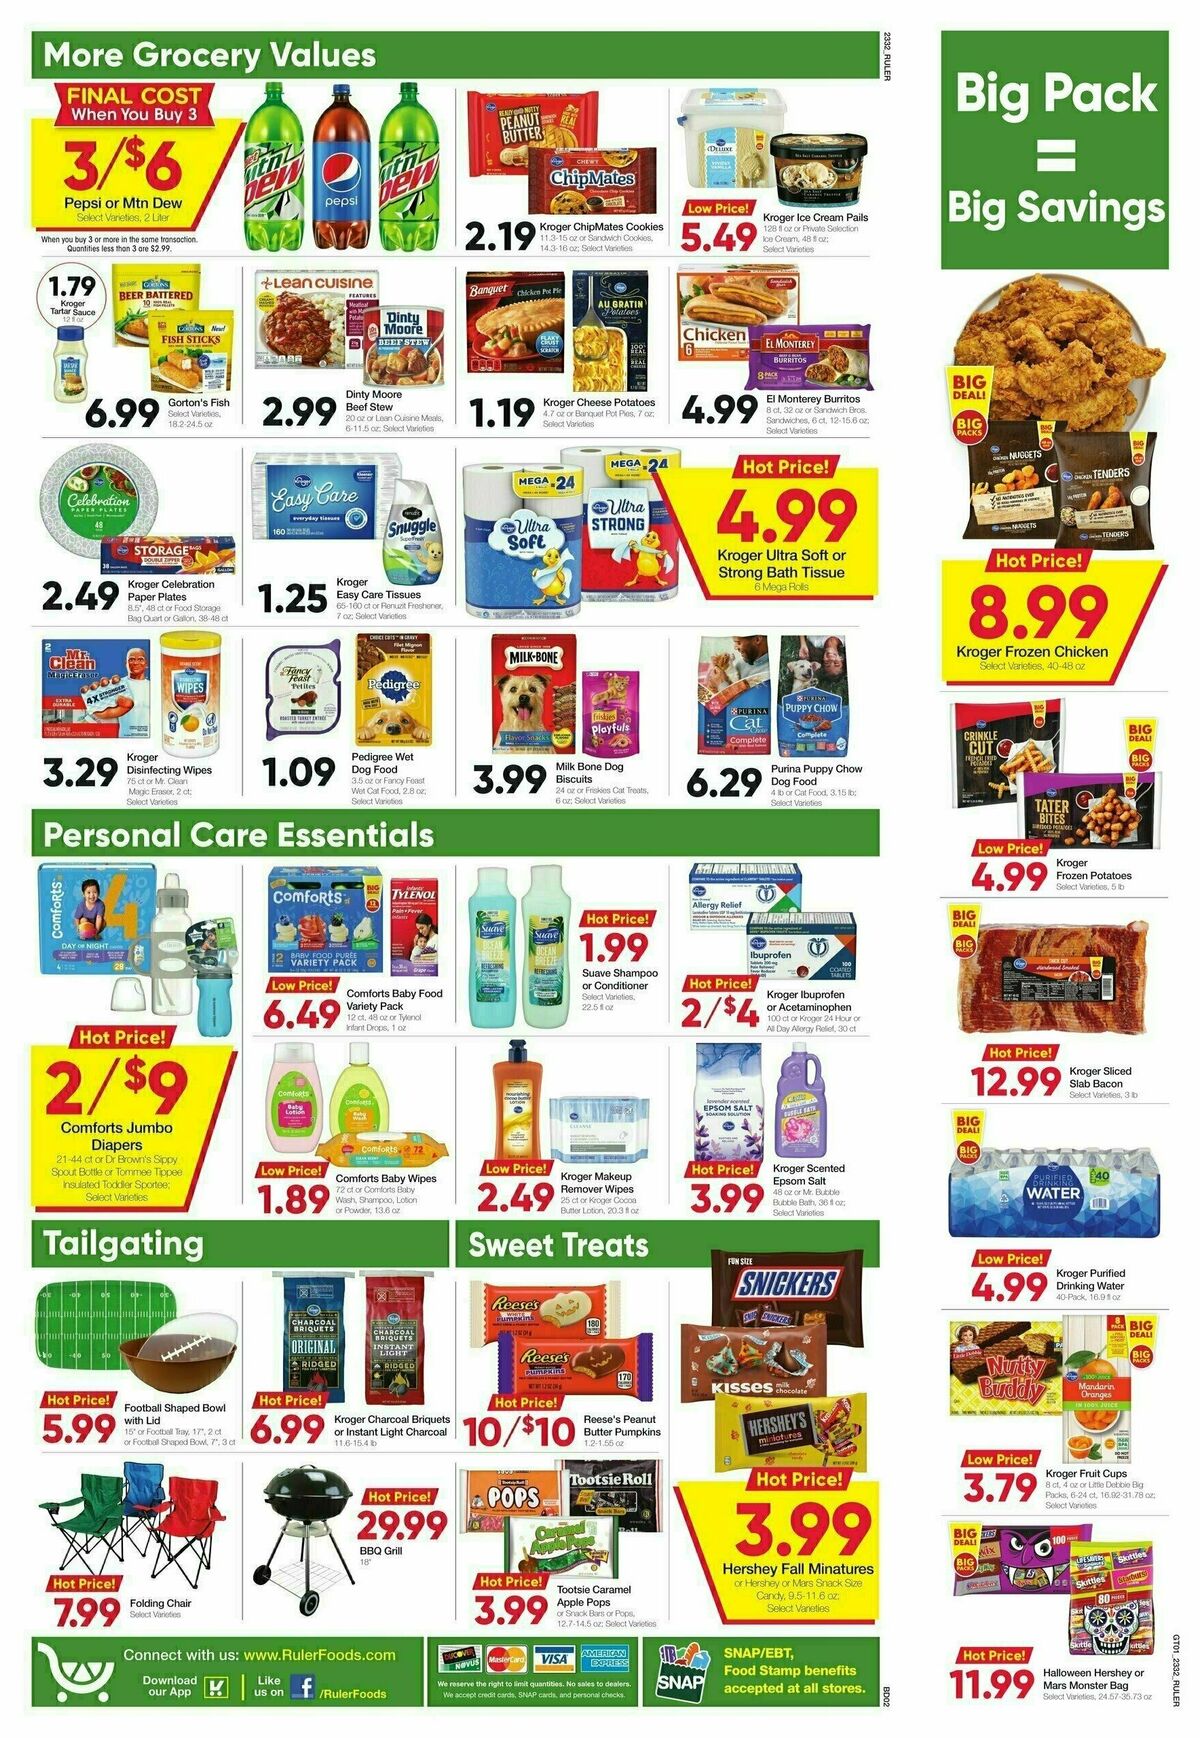 Ruler Foods Best Offers And Special Buys From September 6 Page 2